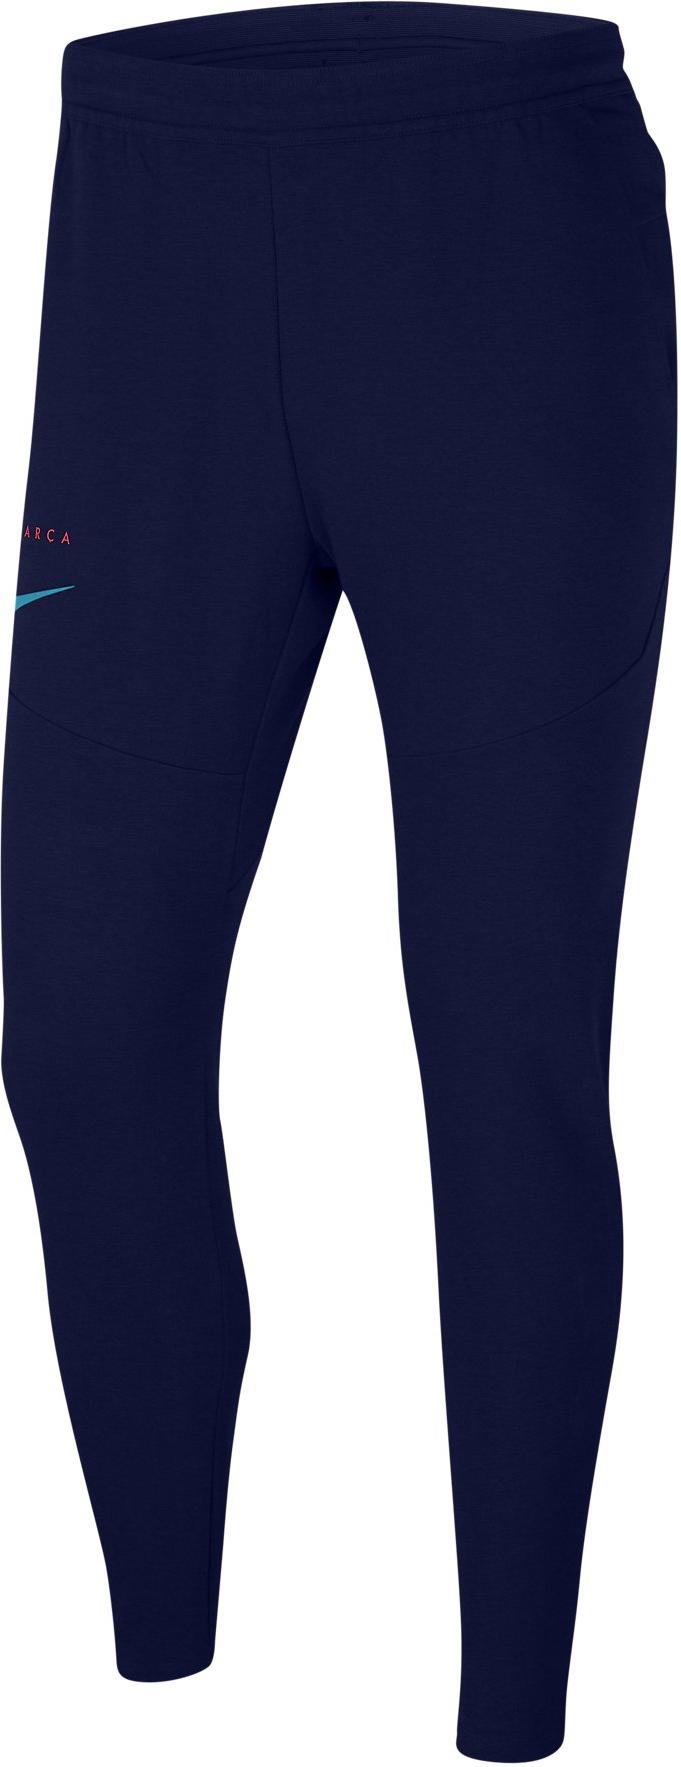 Nike Tech Pack 3/4 Running Training Tights Mens Size XL Navy Blue  AO2193-475 $80 - Helia Beer Co